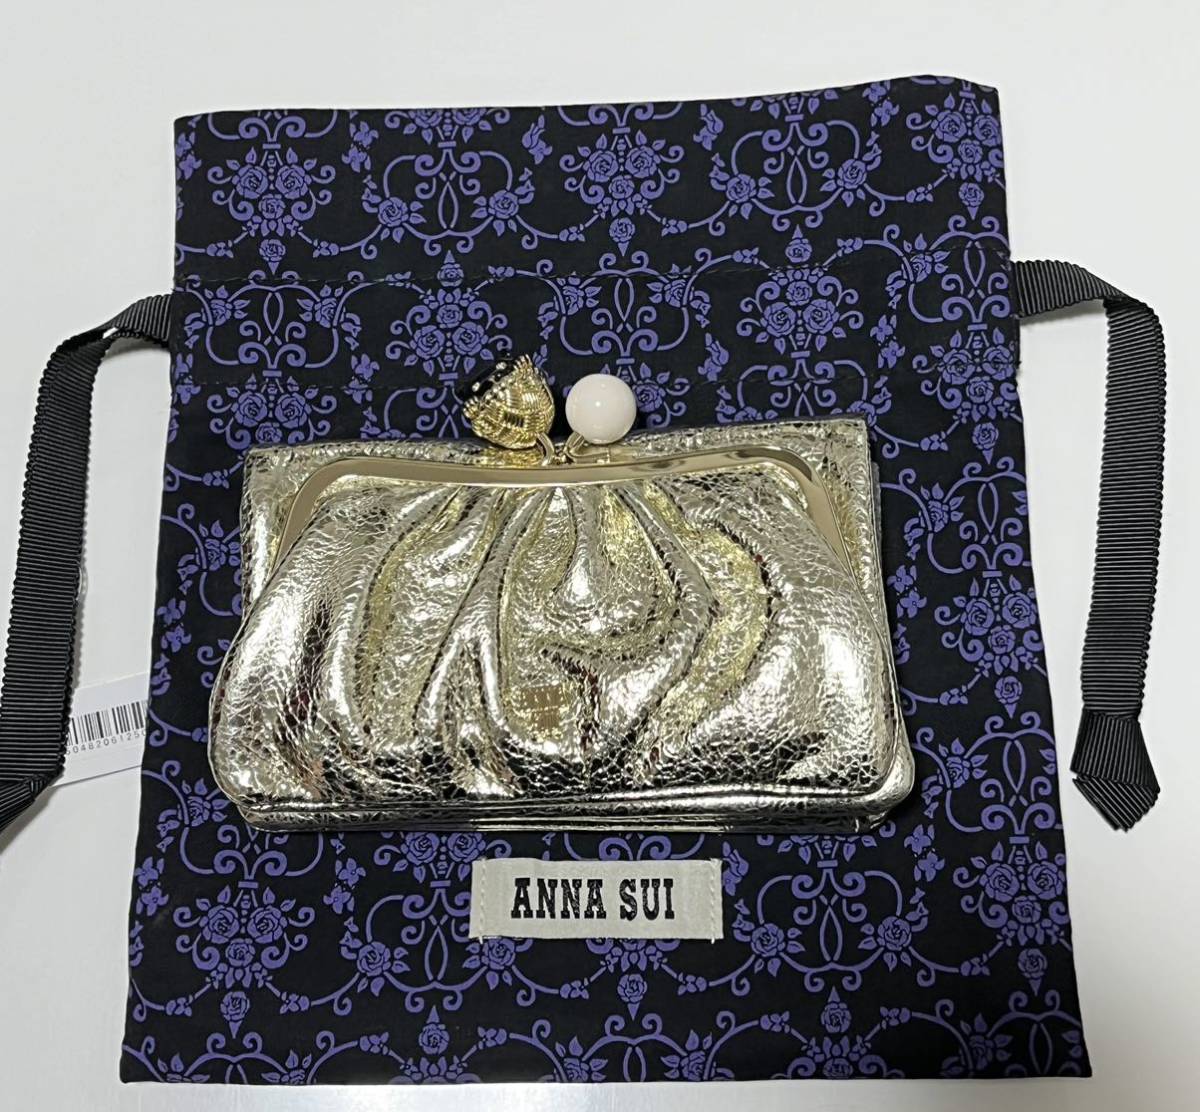  Anna Sui ANNA SUI in The basket out clasp folding twice purse Gold new goods bulrush .